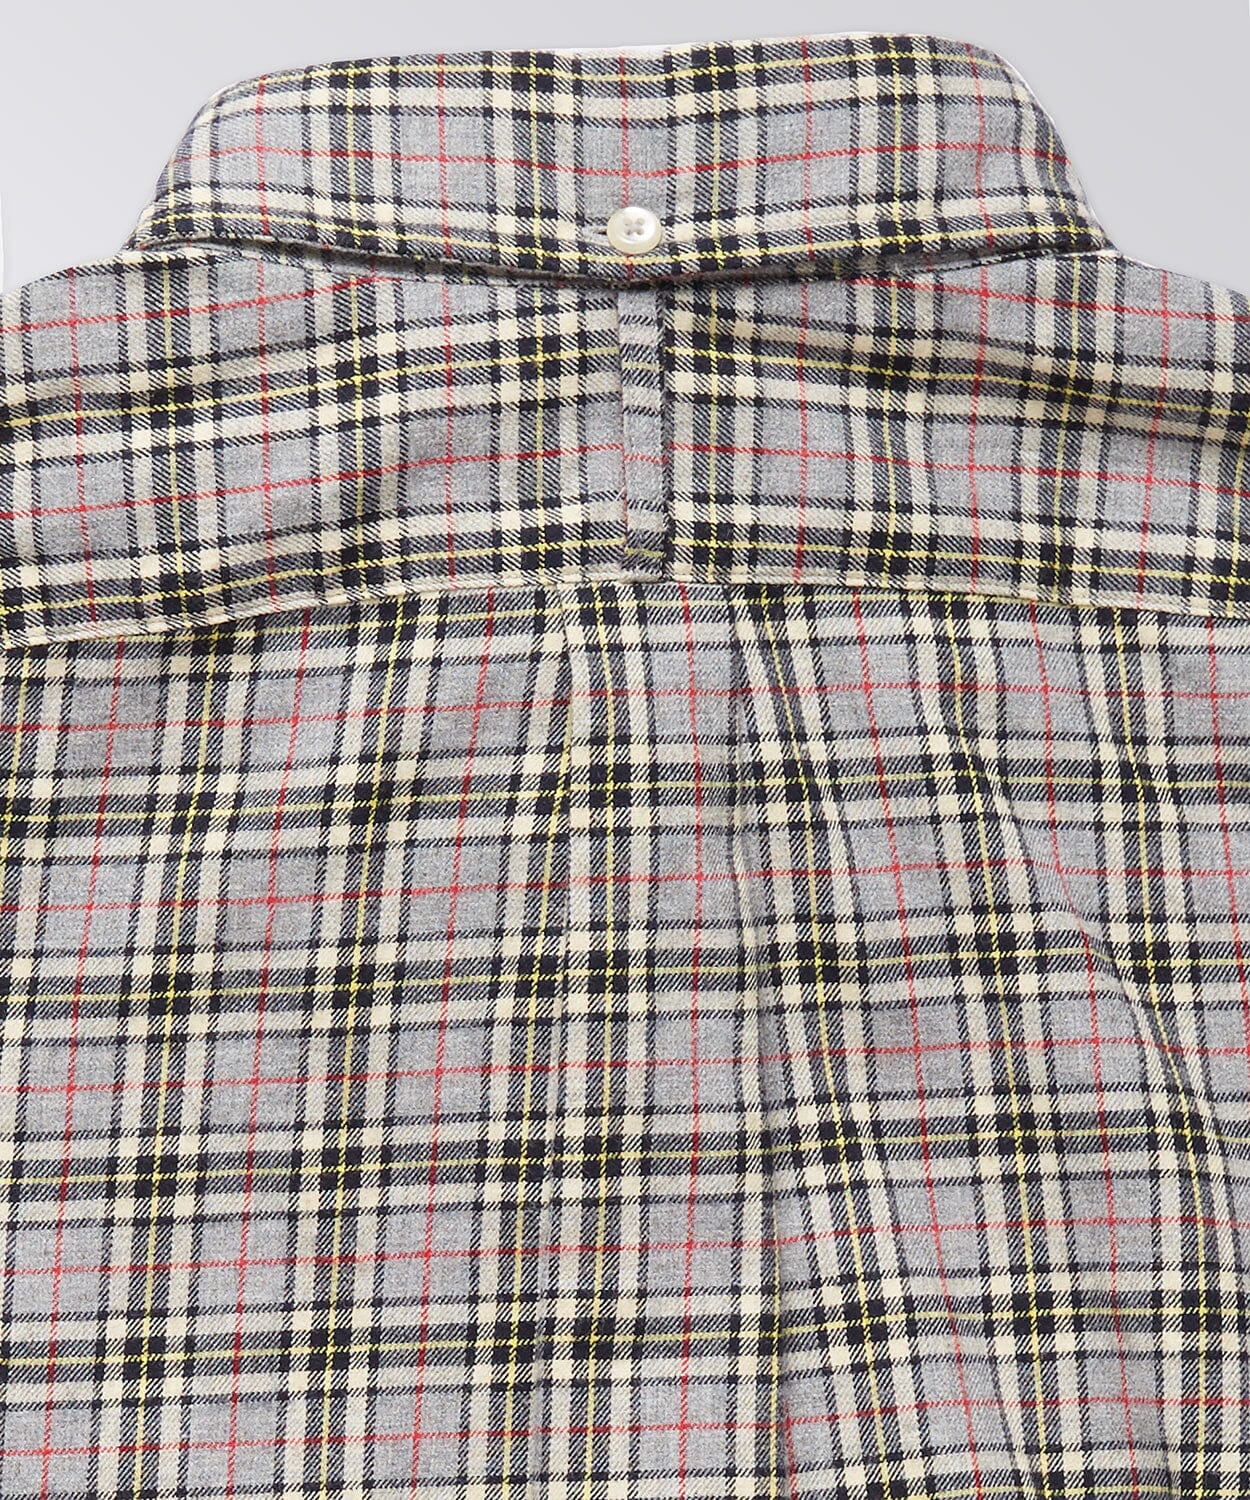 Excella Heather Plaid Shirt Button Downs OOBE BRAND 